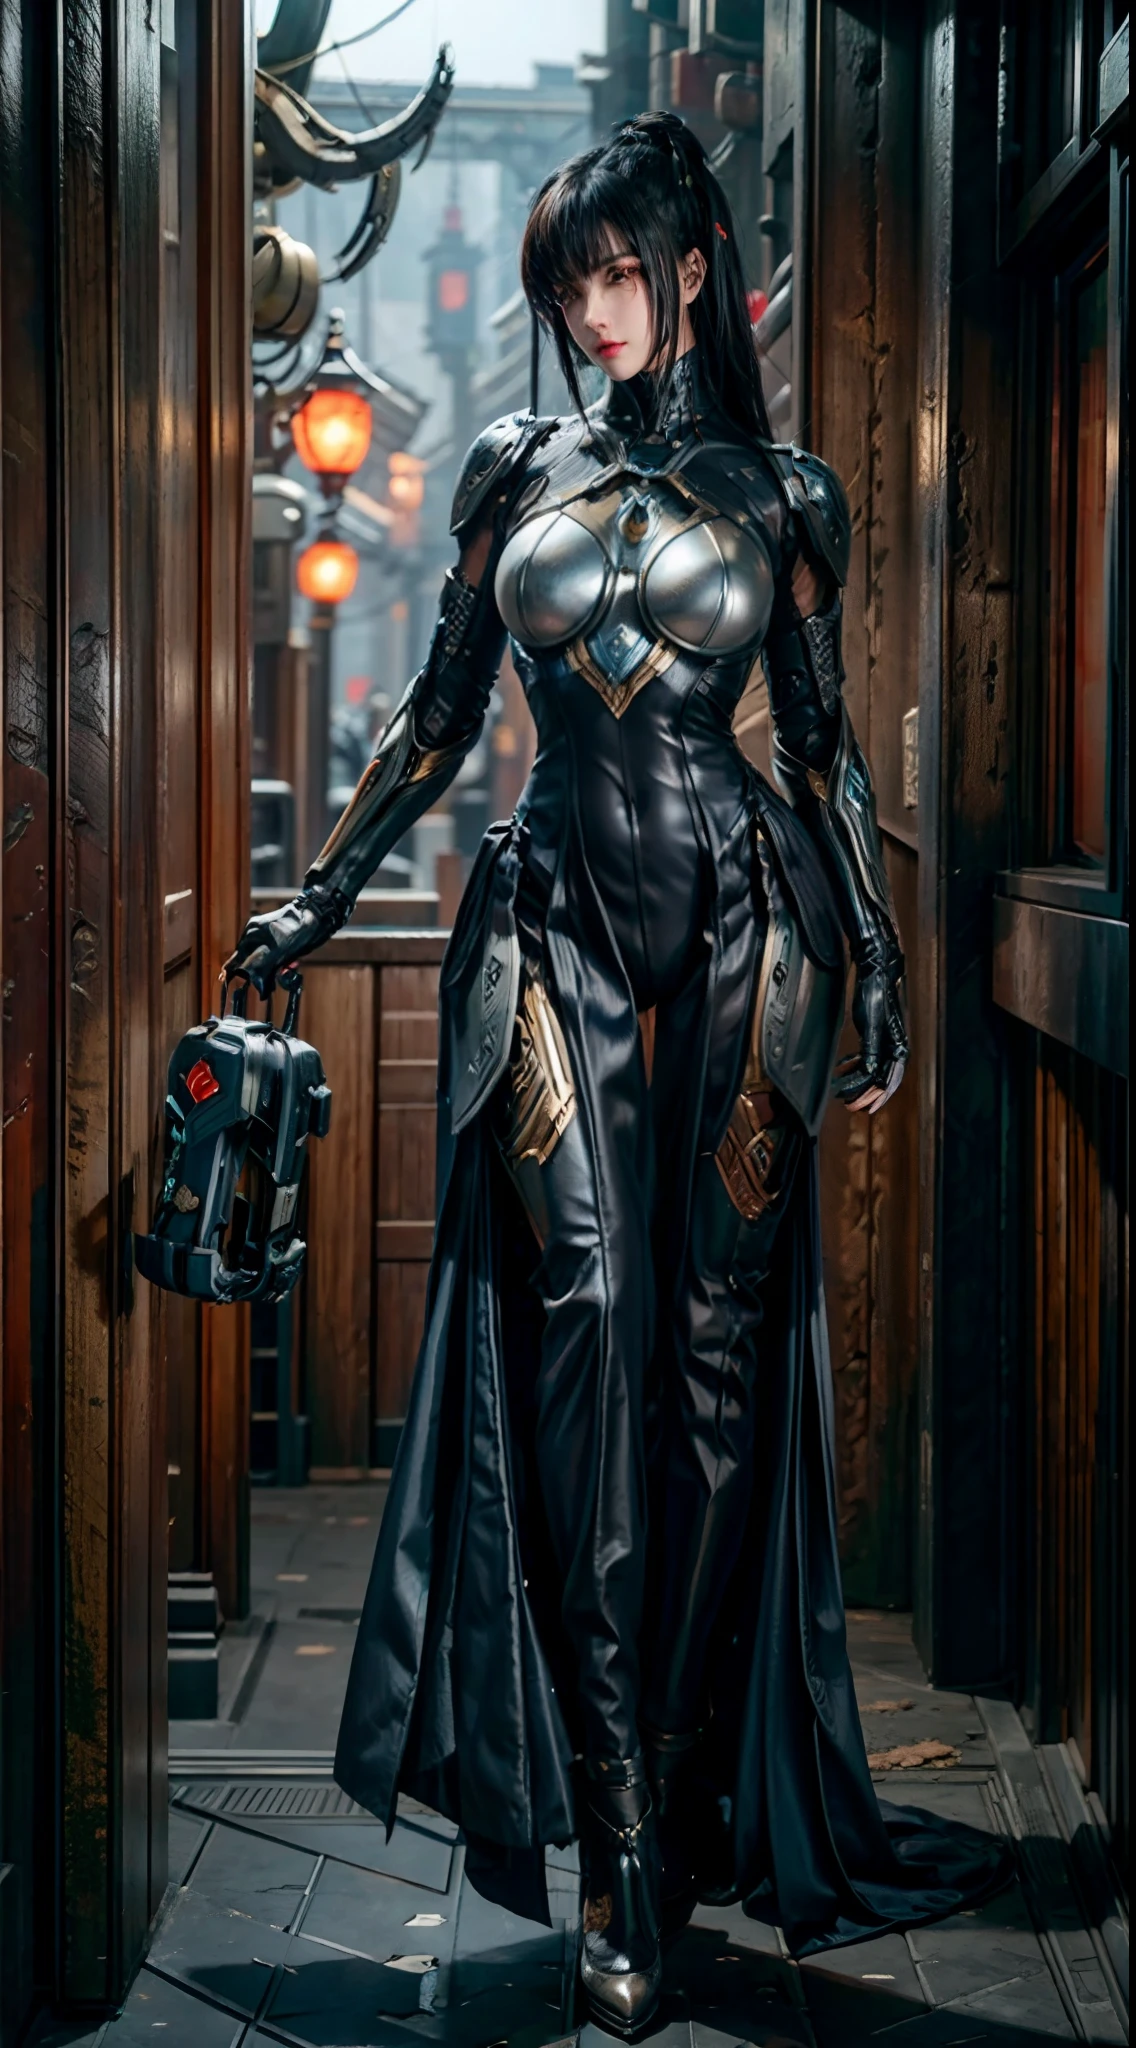 Wear mechanical clothing, Mechanical Wonder, Cyberpunk, cybernetic guardians, futuristic armor, full bodyesbian, front poses, symetry, Intricate (Steel metal [Rust]), Joints, warframe style, Cyborg, Female body and armor, Chainsaw man